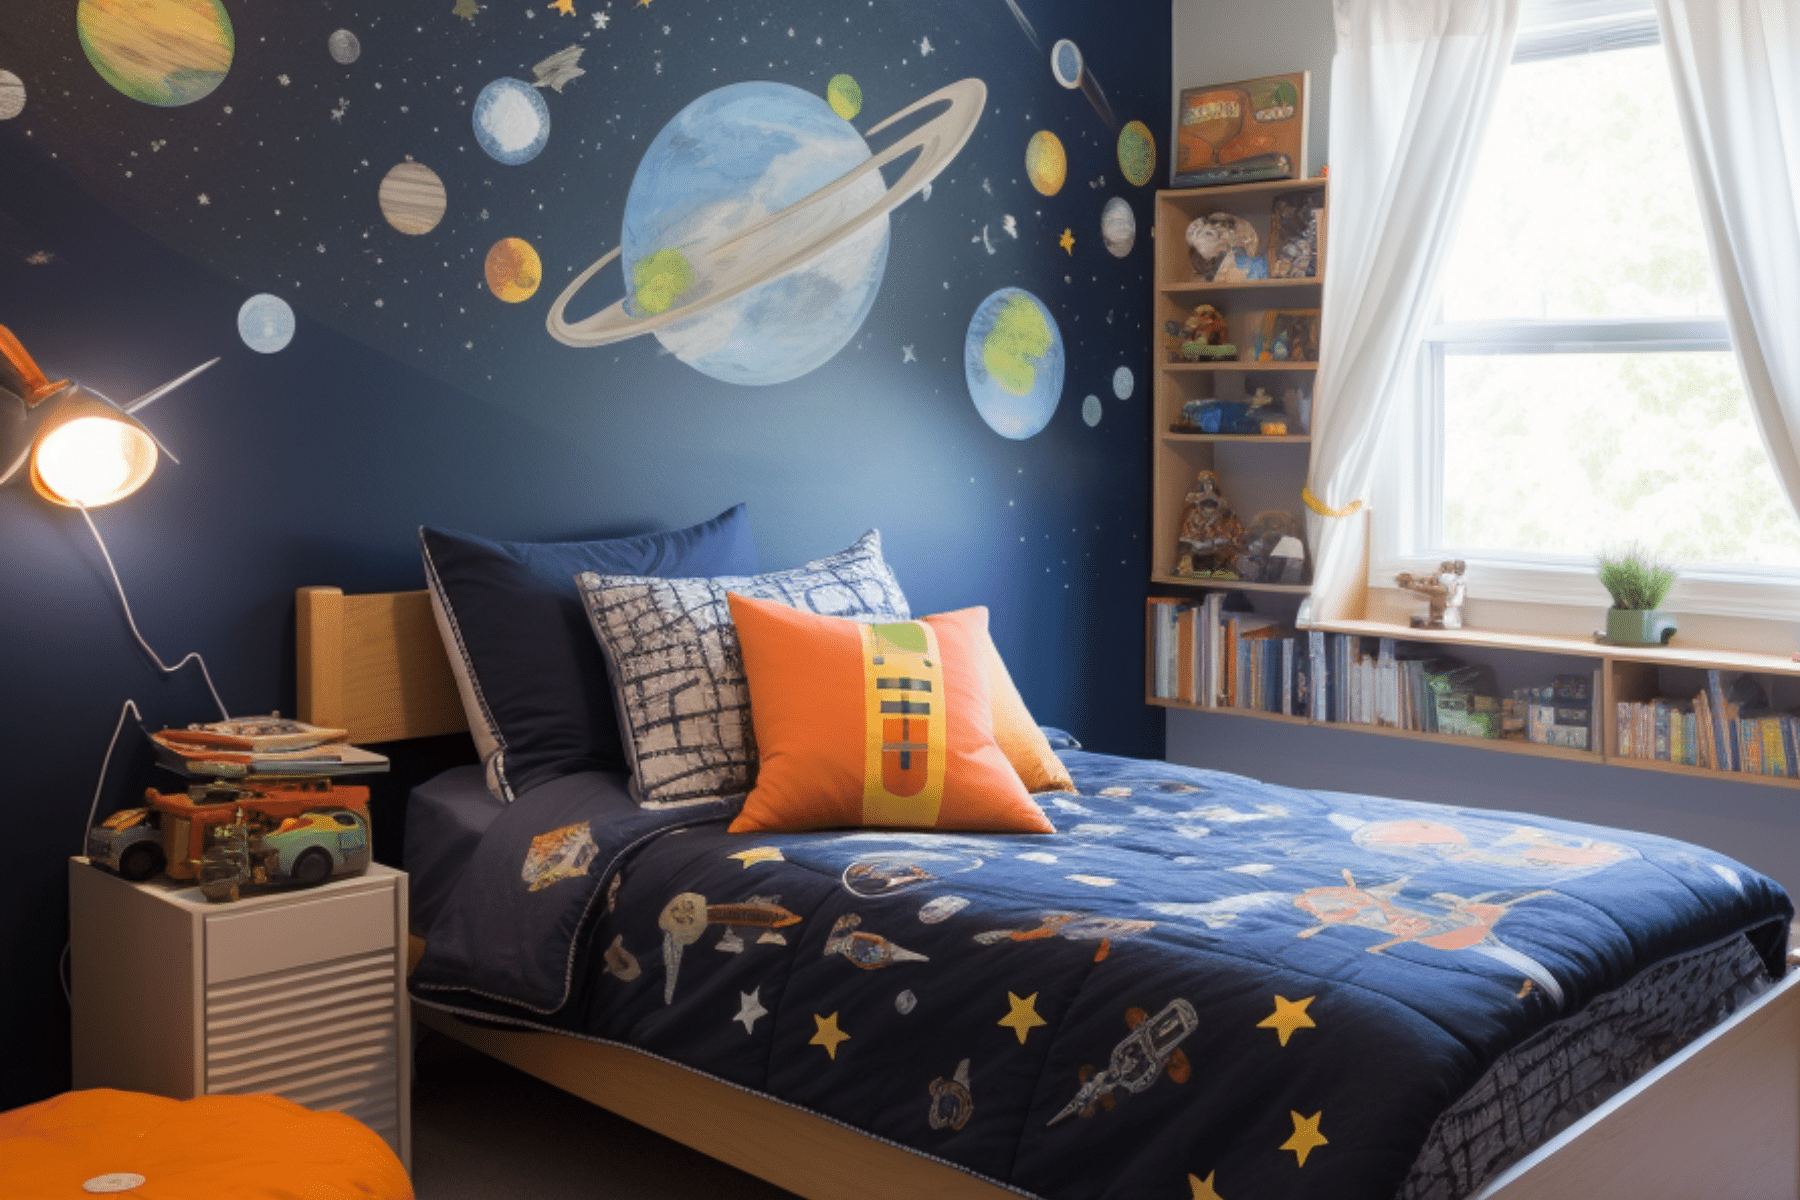 Update your child’s bedroom on a budget with storage options